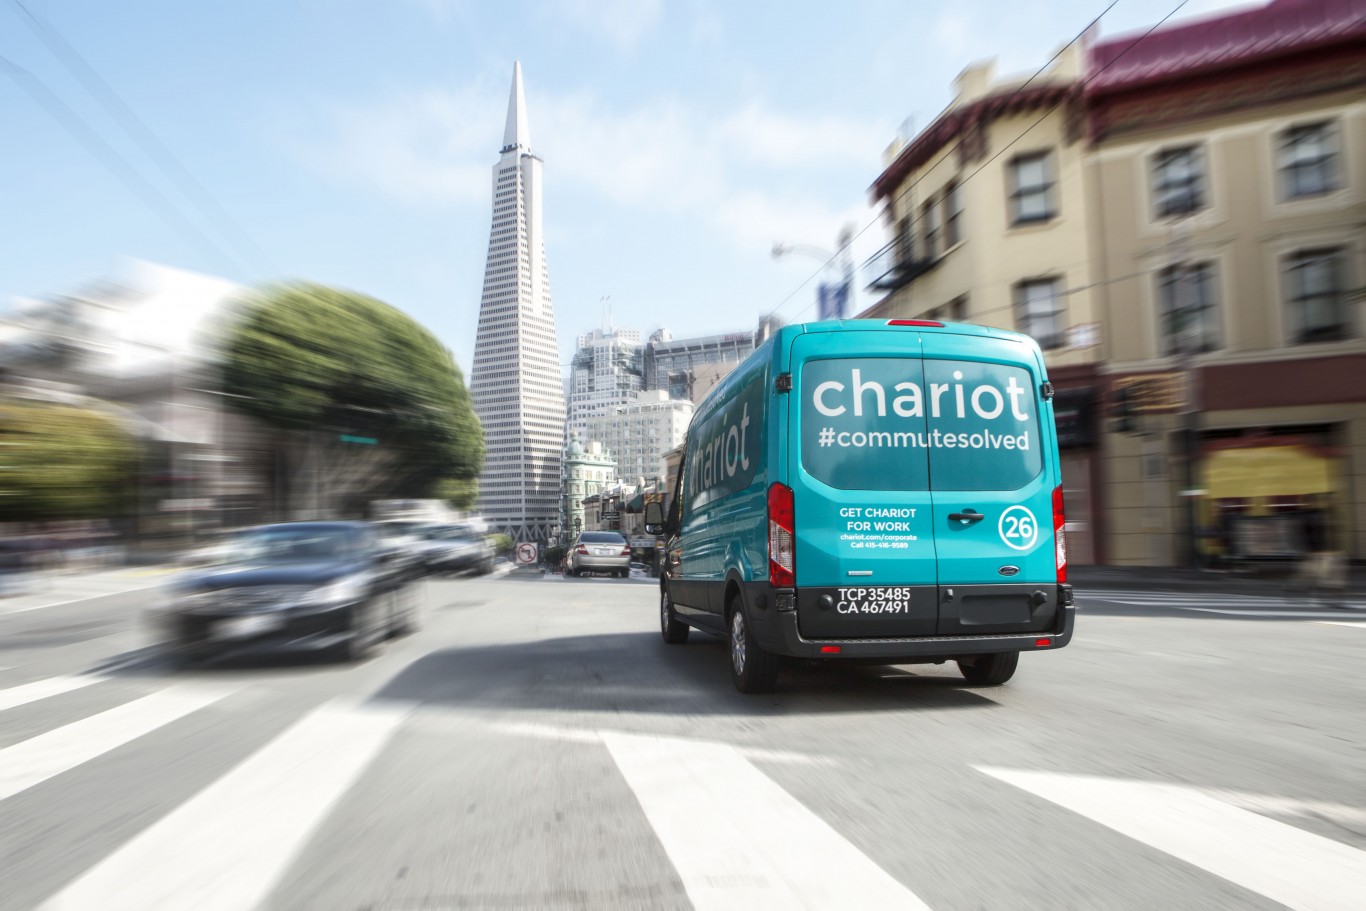 Ford Smart Mobility LLC to acquire Chariot, a San Francisco-based crowd-sourced shuttle service that plans to grow Ford’s dynamic shuttle services globally, providing affordable and convenient transportation to at least five additional markets in 18 months